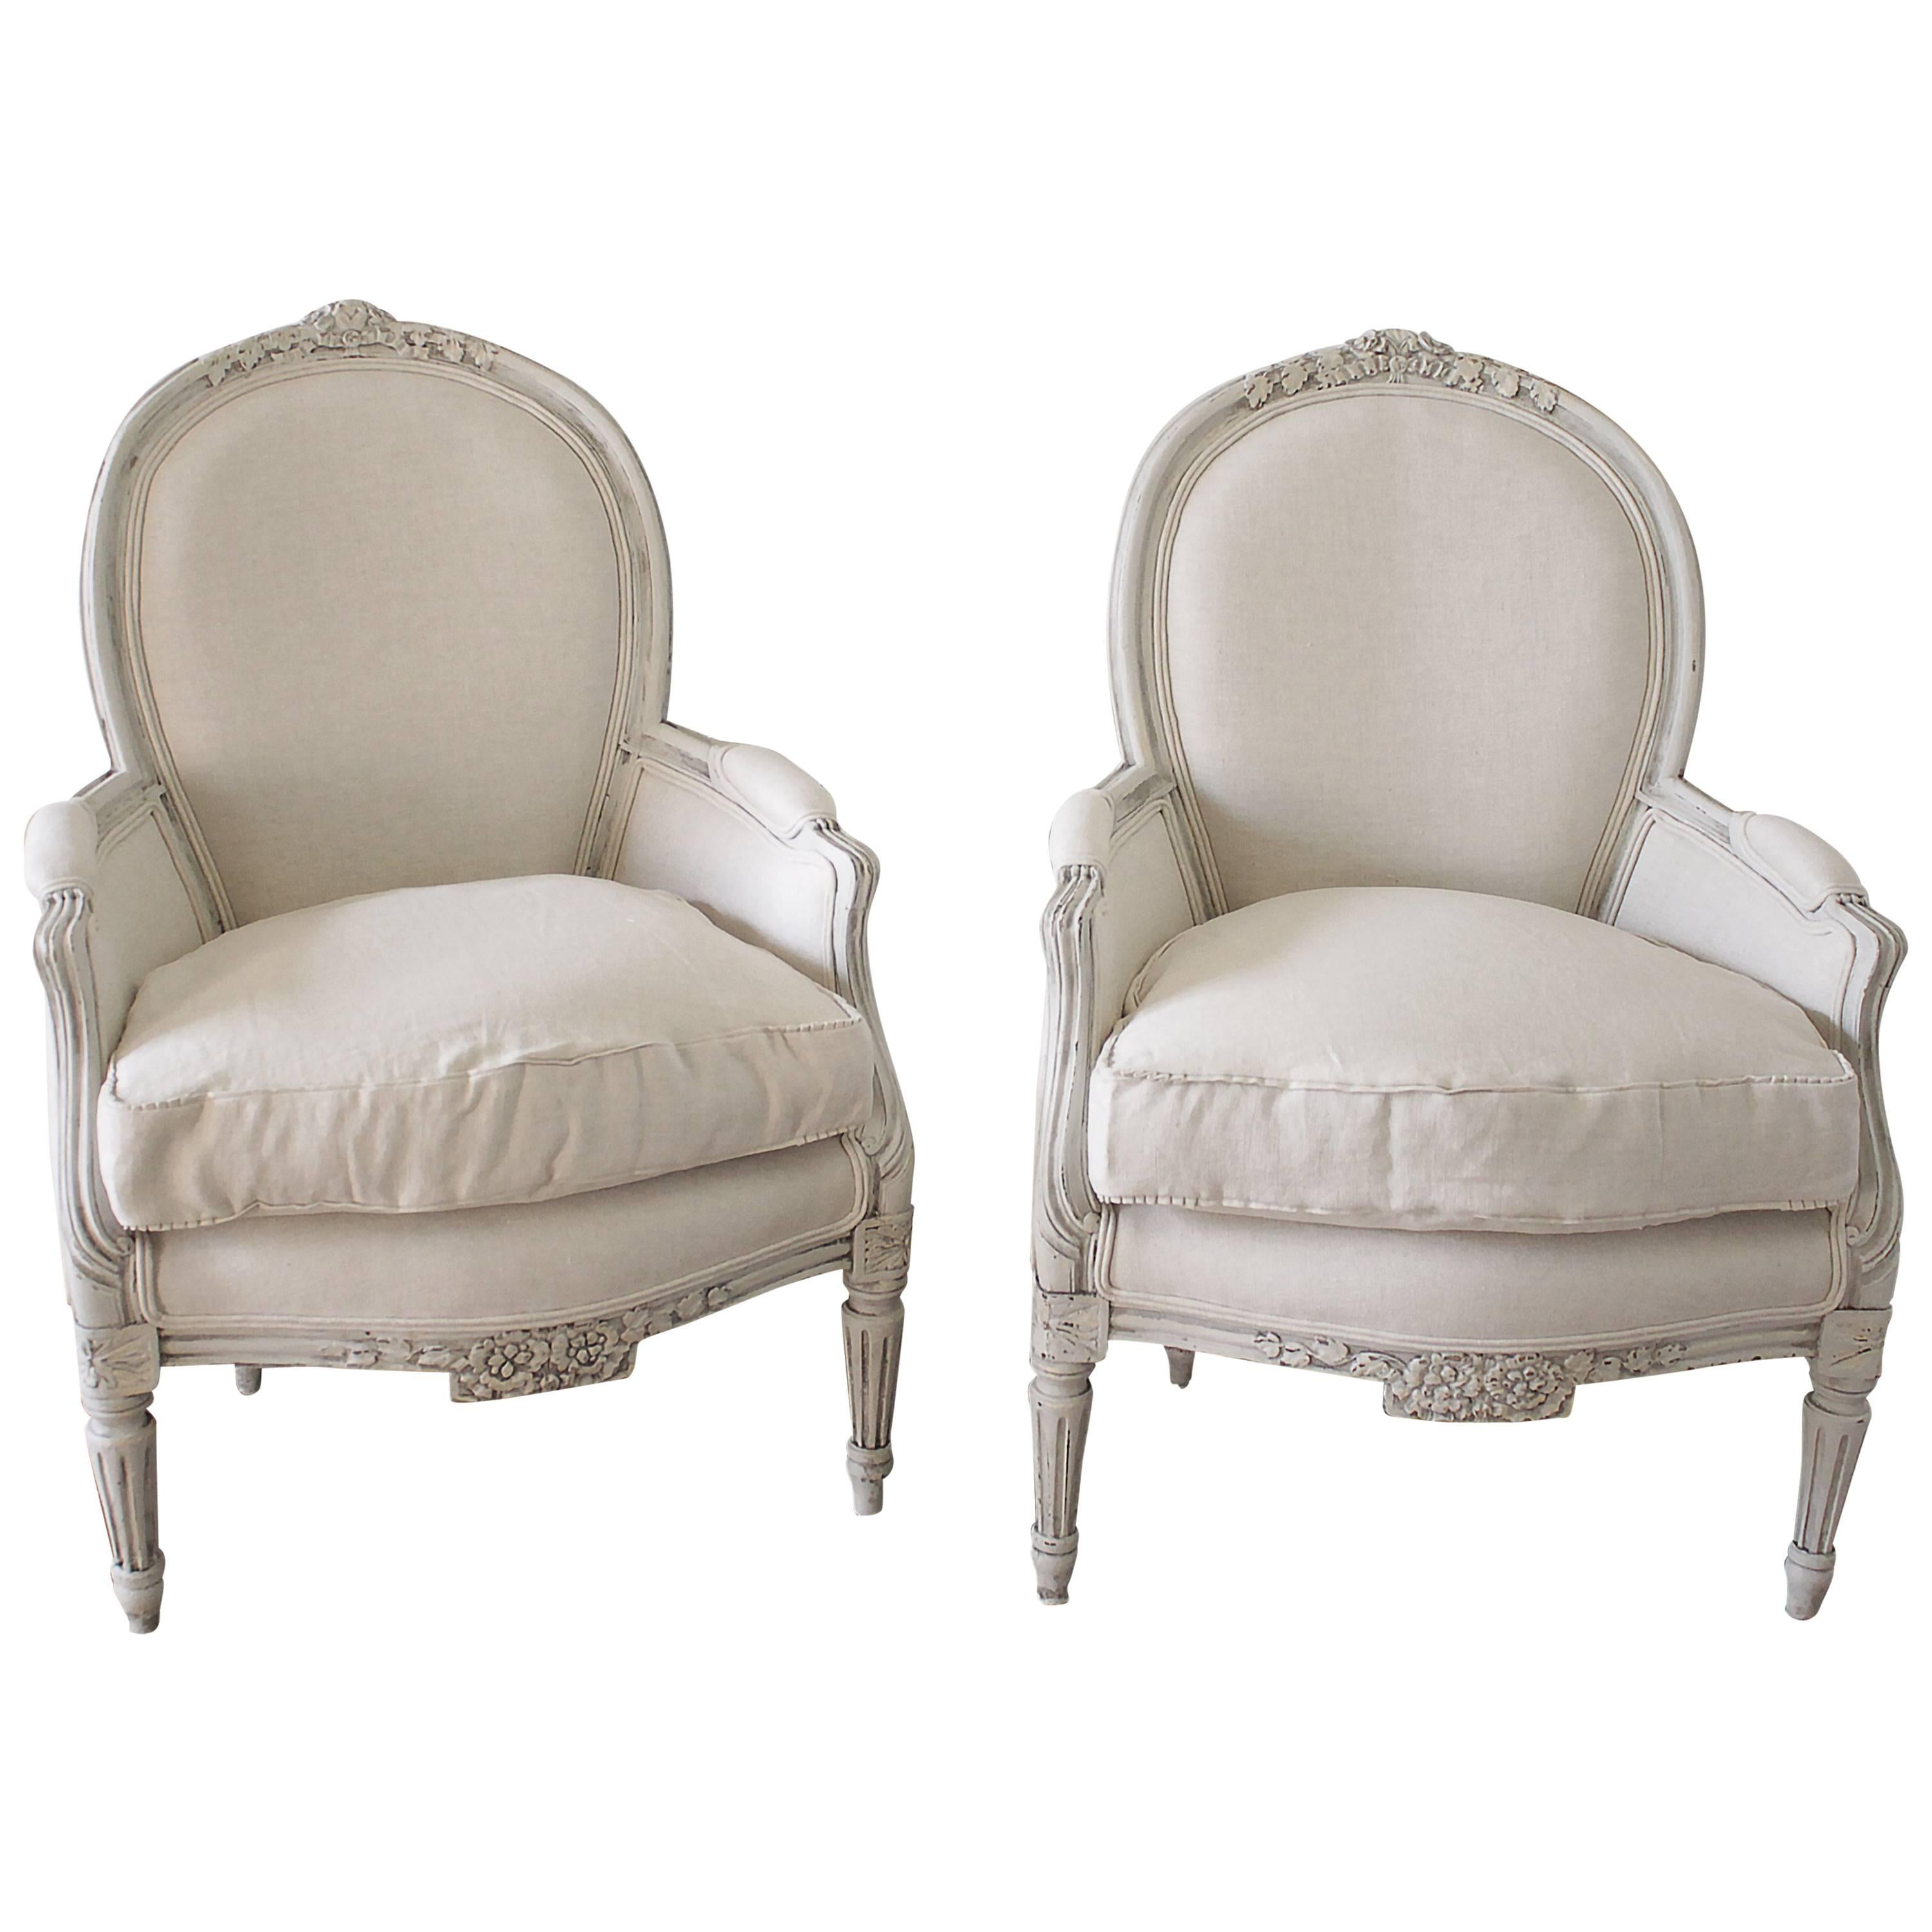 Pair of Painted and Upholstered Belgian Linen Louis XVI Style Bergere Chairs